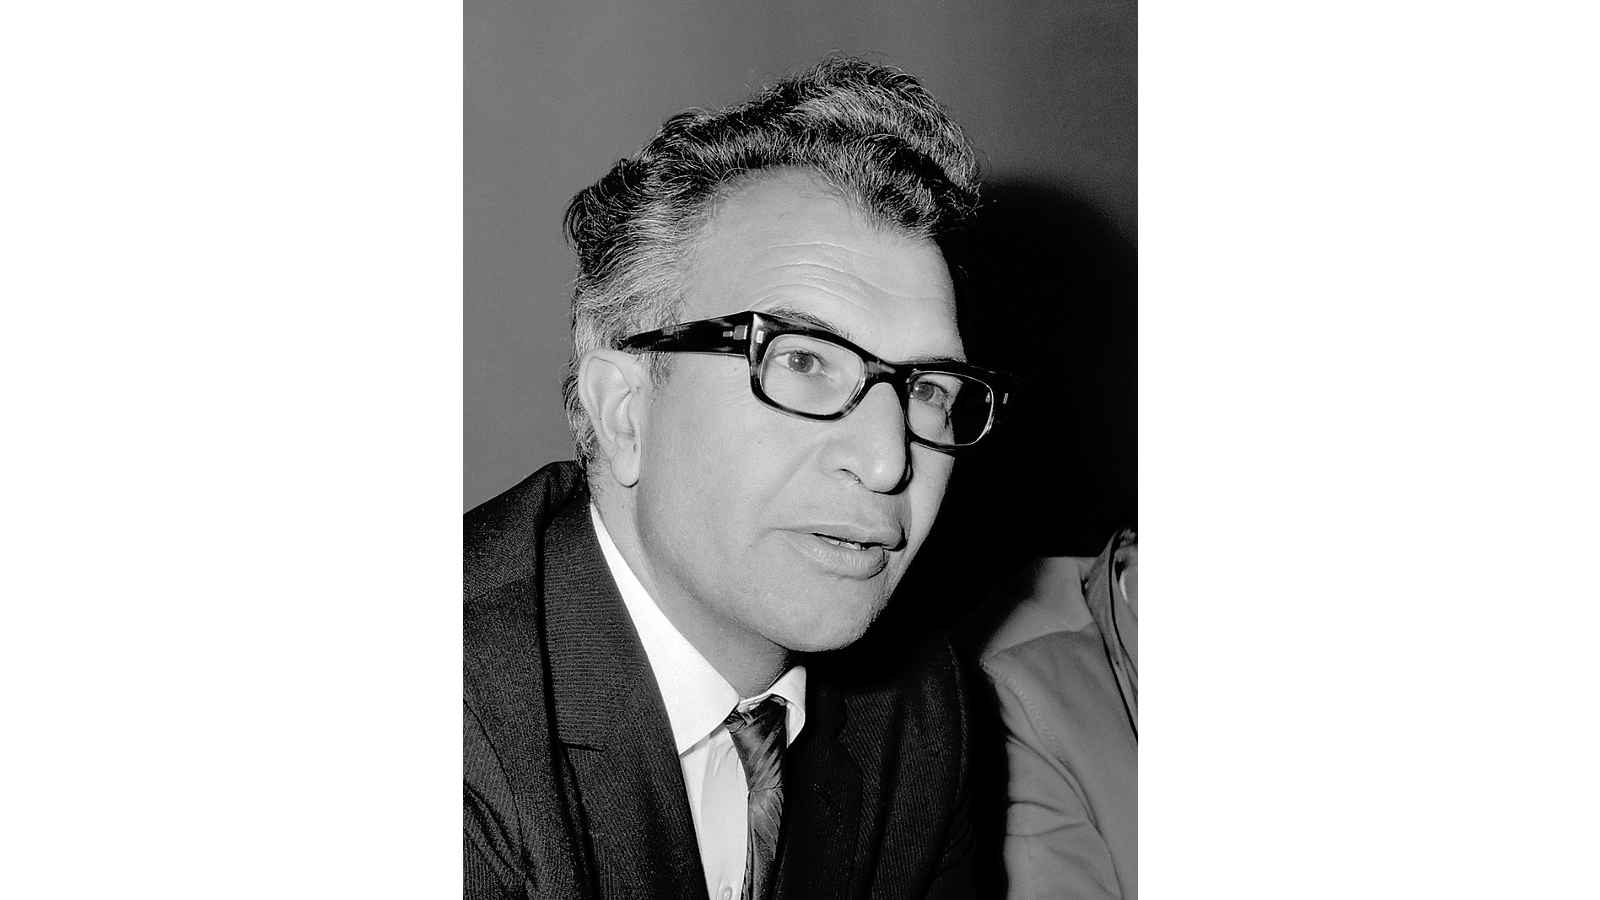 Dave Brubeck Day 2023: Date, History, Facts about Dave Brubeck